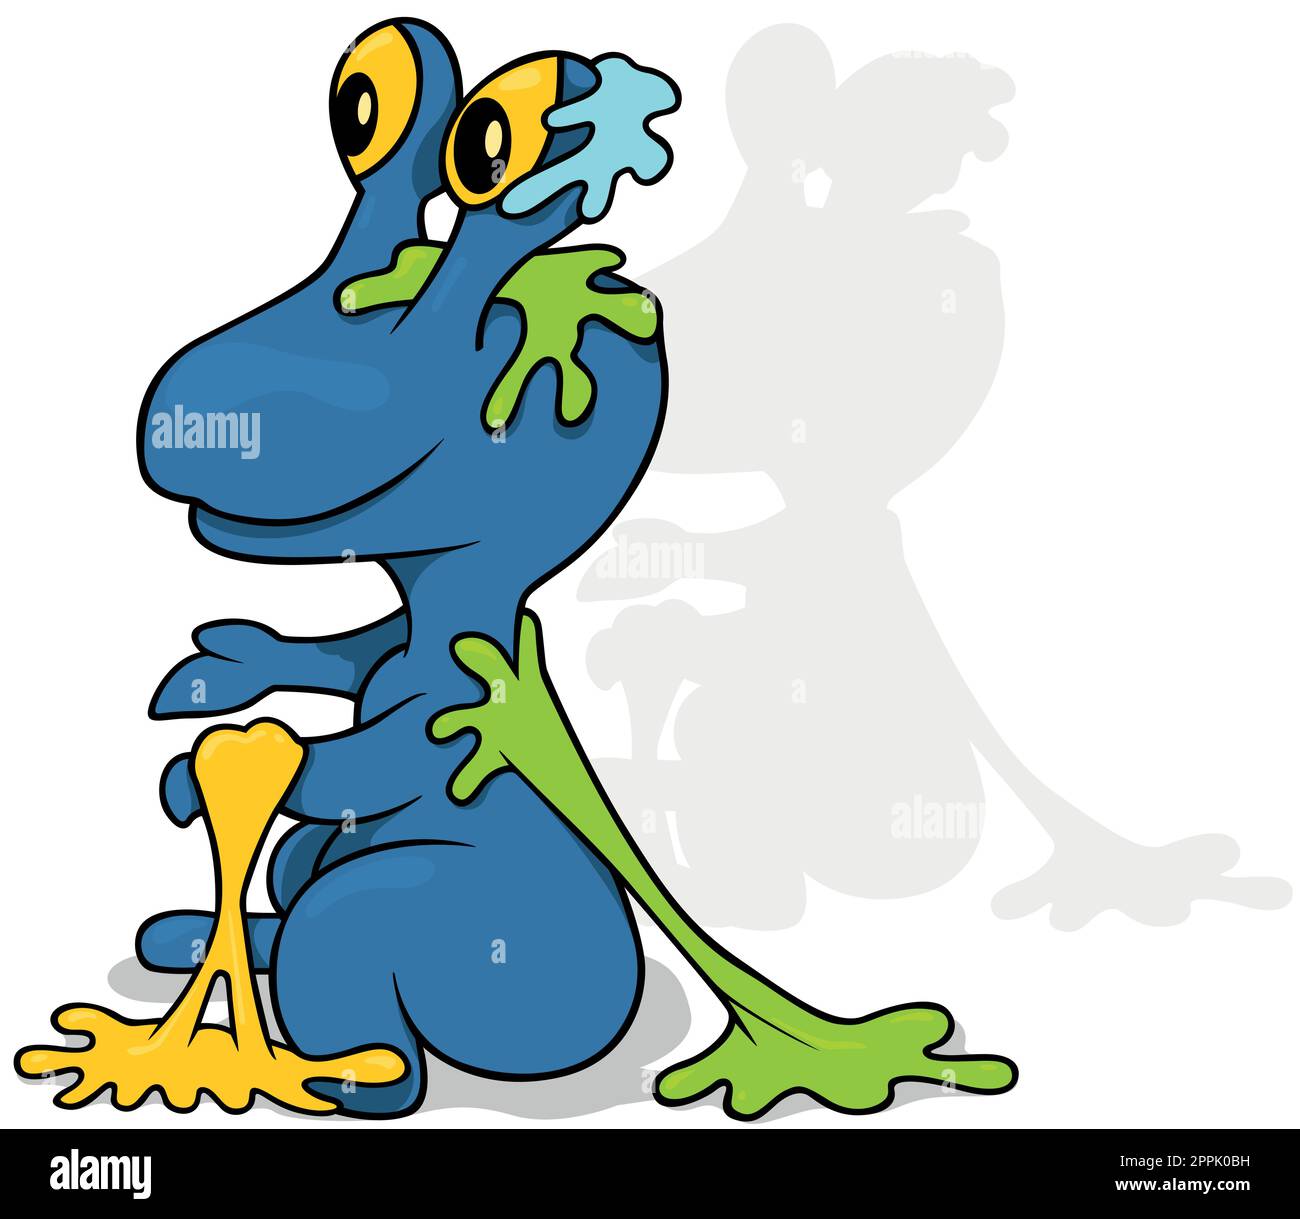 Blue Garbage Monster with Colorful Slime on his Body Stock Vector